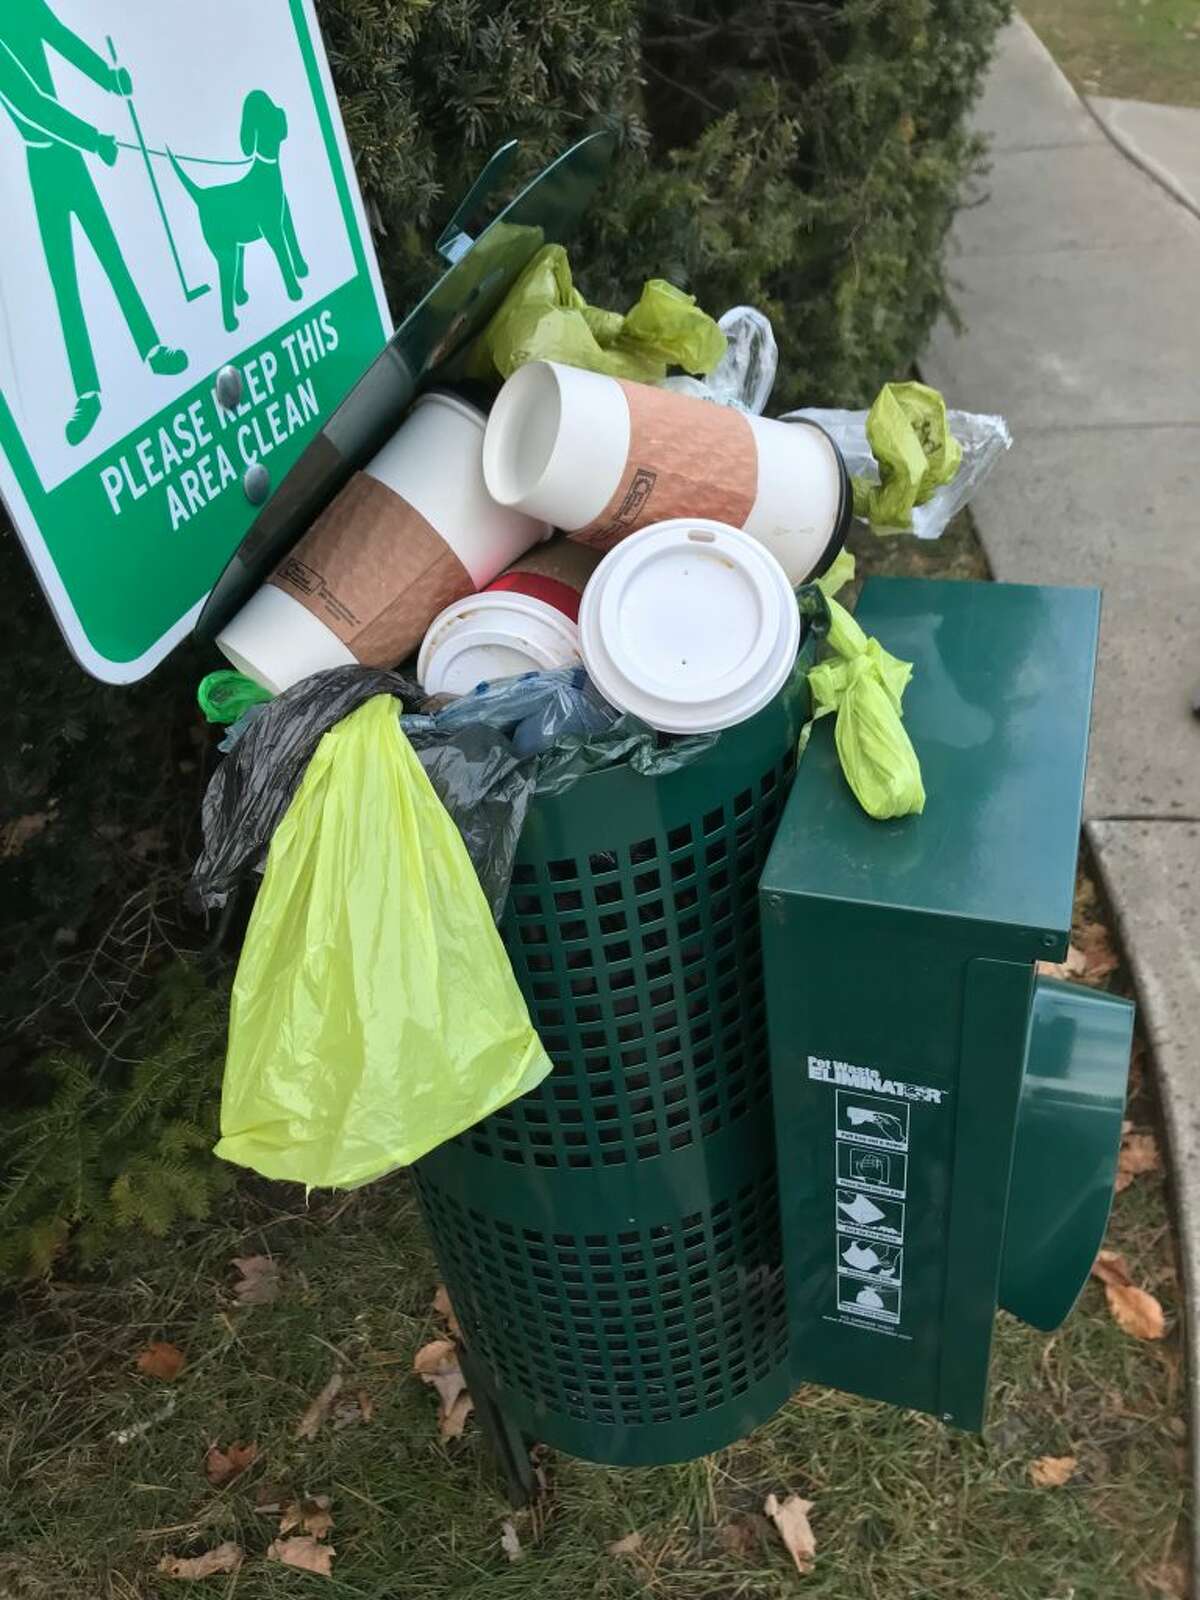 Thanksgiving weekend was not kind to the town's dog waste stations. Beer cans, coffee cups, and even a diaper were found inside the Main Street receptacles Sunday, Nov. 25.